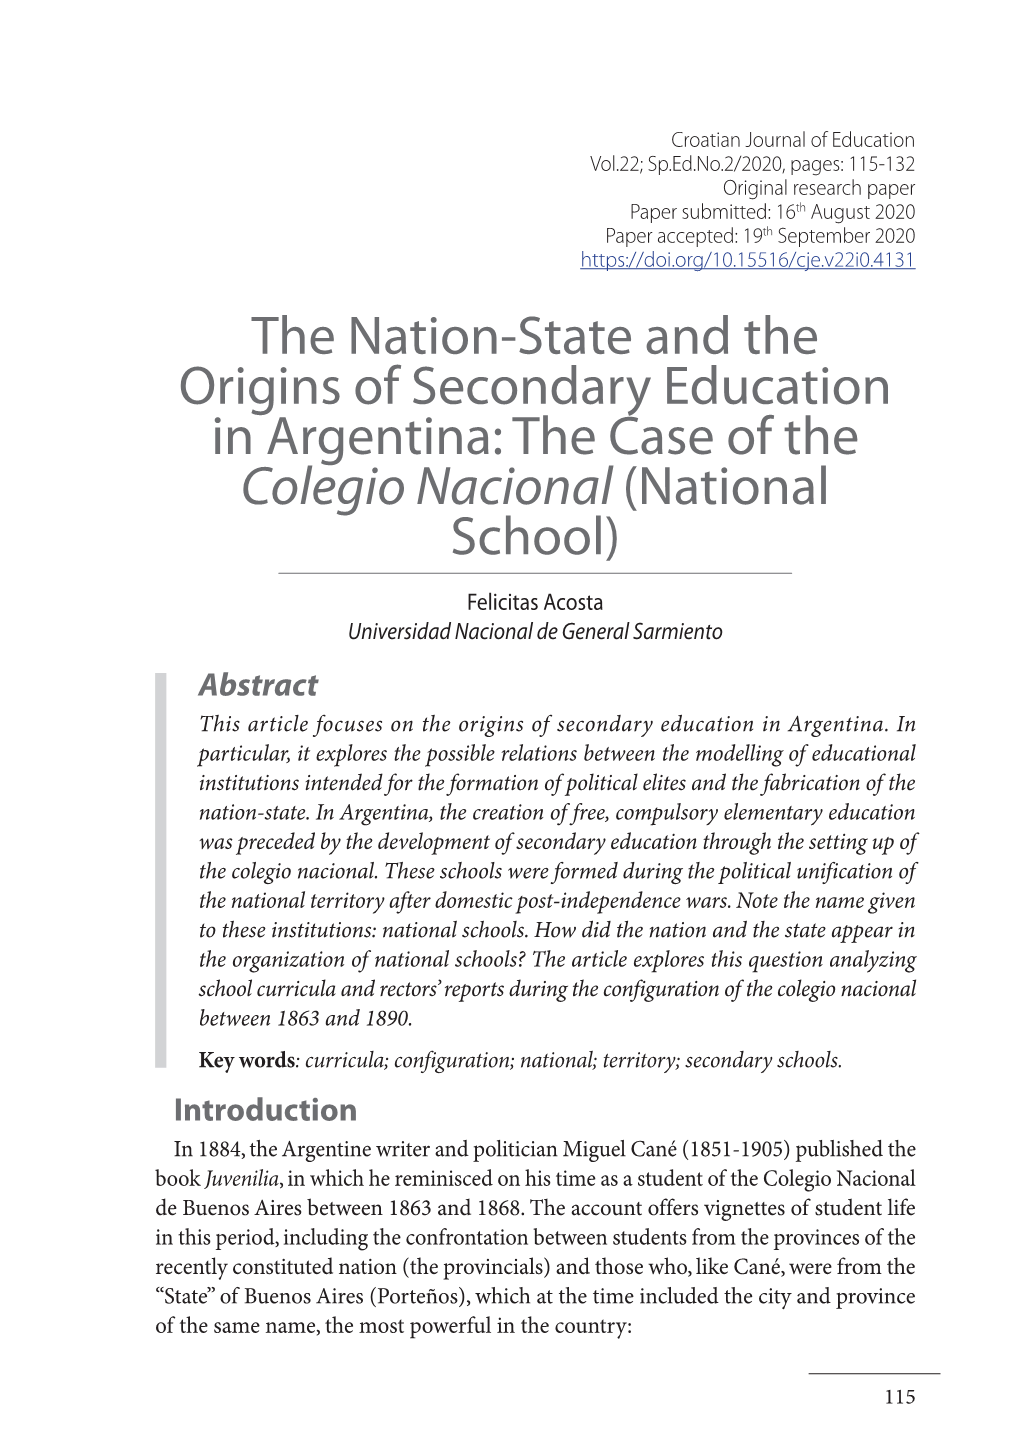 The Nation-State and the Origins of Secondary Education in Argentina